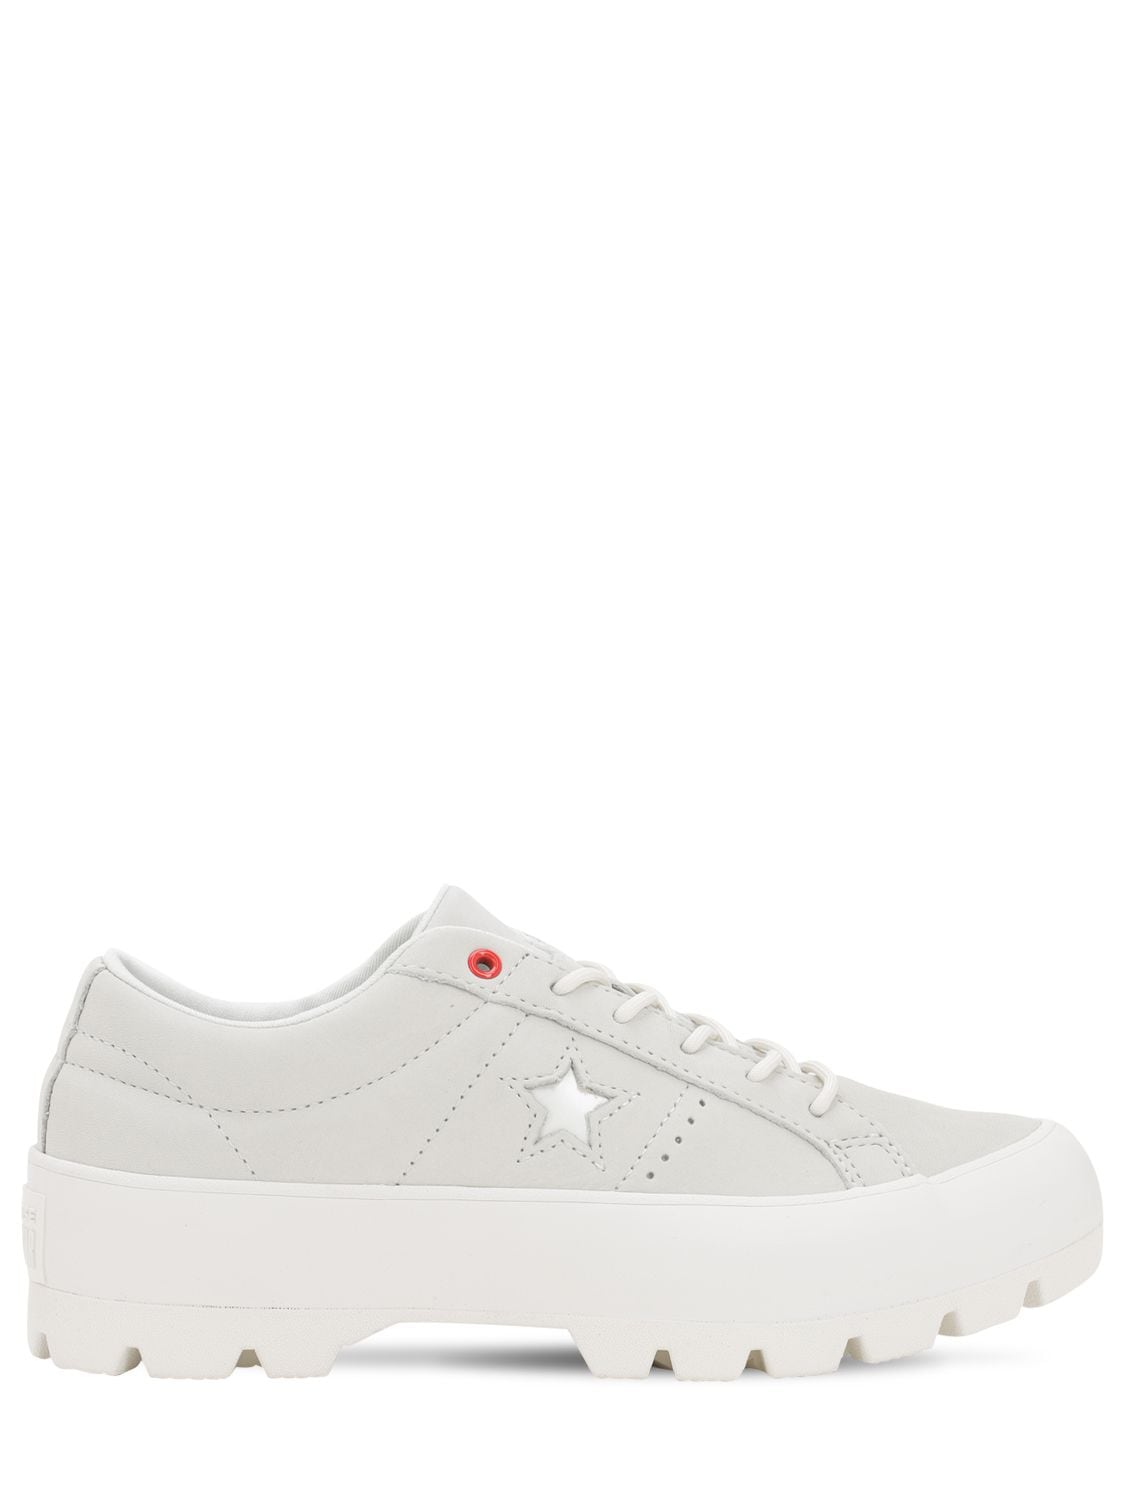 Converse One Star Lugged Spacecraft Ox 